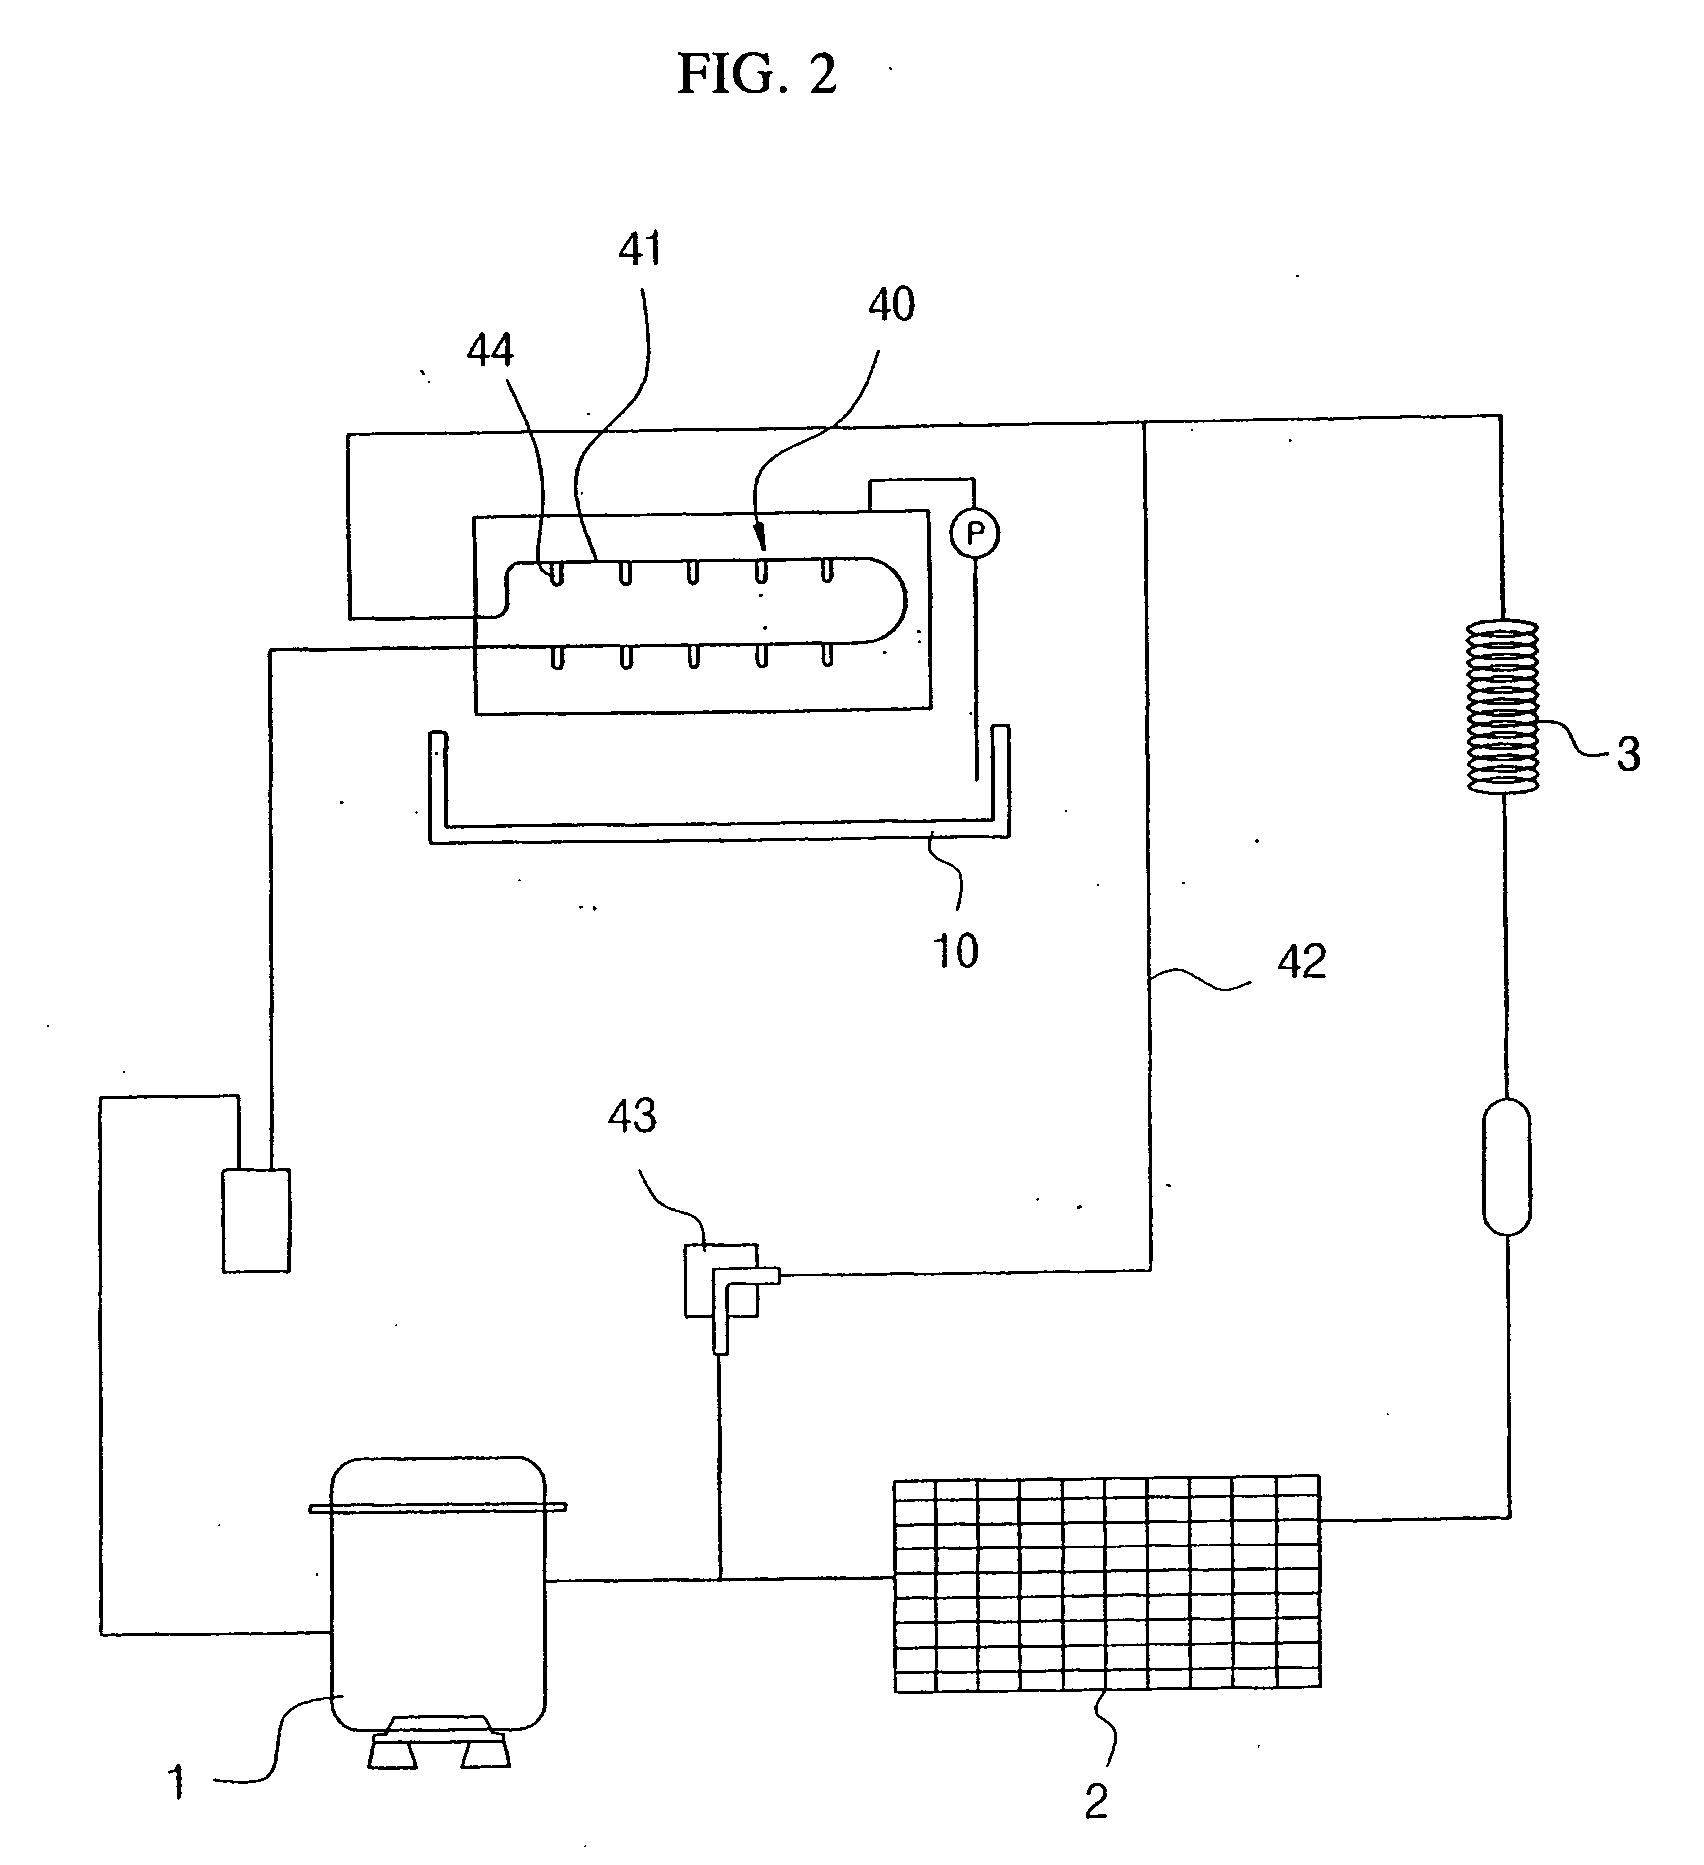 Water purifying system and apparatus for simultaneously making ice and cold water using one evaporator